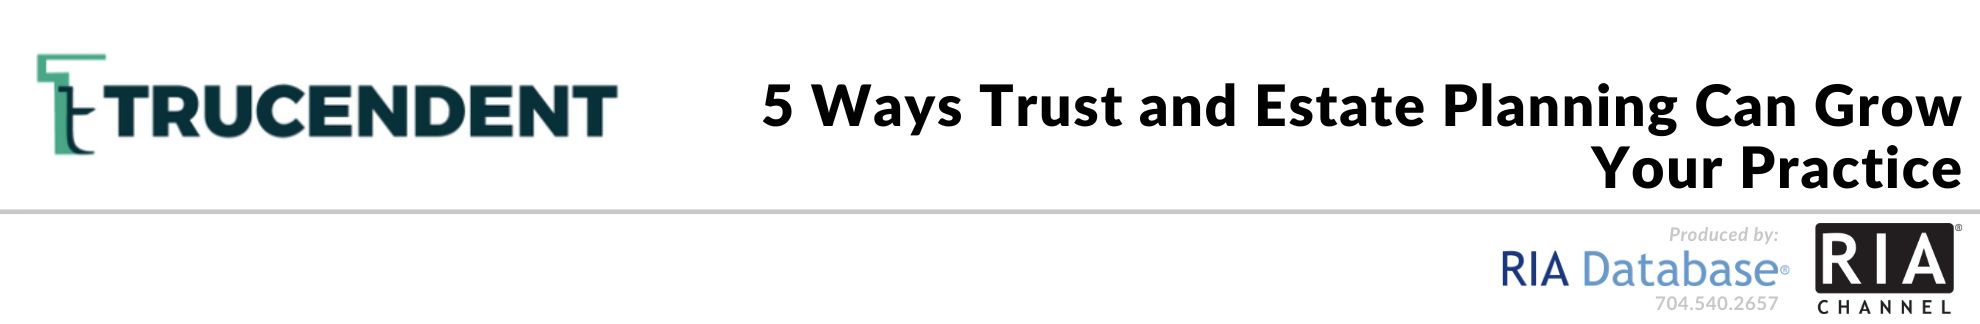 5 Ways Trust and Estate Planning Can Grow Your Practice

